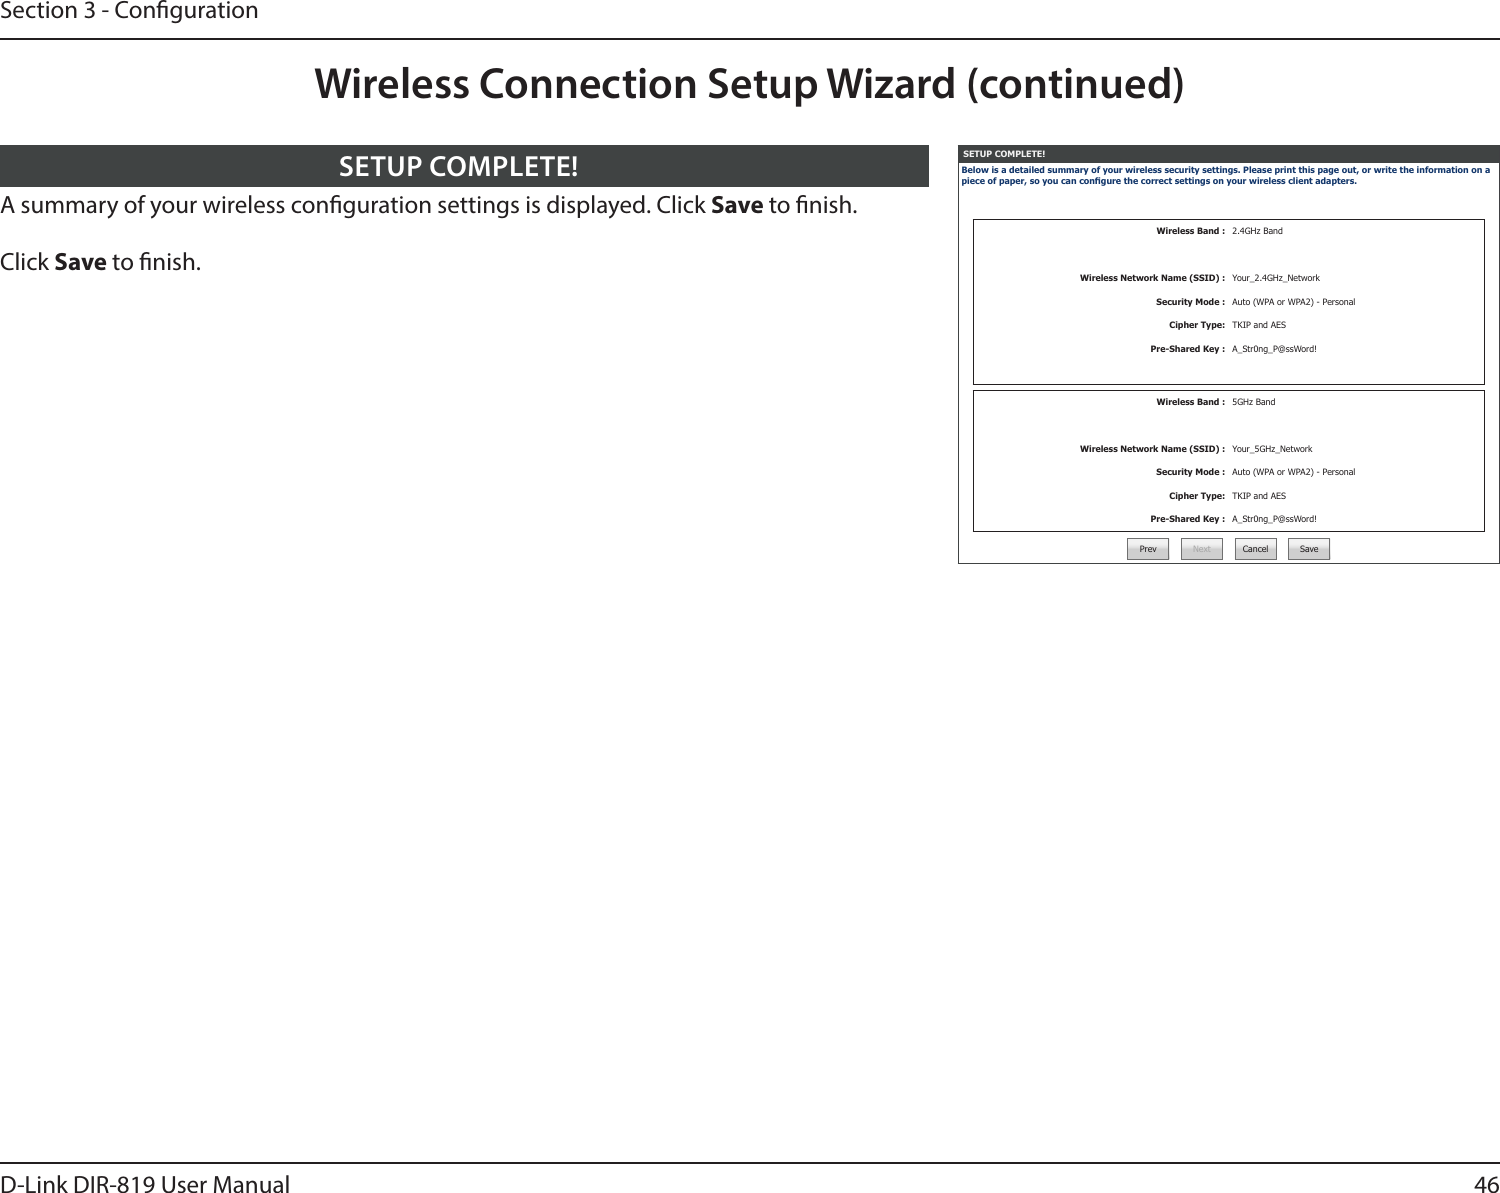 46D-Link DIR-819 User ManualSection 3 - CongurationSETUP COMPLETE!Below is a detailed summary of your wireless security settings. Please print this page out, or write the information on a piece of paper, so you can congure the correct settings on your wireless client adapters.Wireless Band : 2.4GHz BandWireless Network Name (SSID) : Your_2.4GHz_NetworkSecurity Mode : Auto (WPA or WPA2) - PersonalCipher Type: TKIP and AESPre-Shared Key : A_Str0ng_P@ssWord!Wireless Band : 5GHz BandWireless Network Name (SSID) : Your_5GHz_NetworkSecurity Mode : Auto (WPA or WPA2) - PersonalCipher Type: TKIP and AESPre-Shared Key : A_Str0ng_P@ssWord!Prev Next Cancel SaveA summary of your wireless conguration settings is displayed. Click Save to nish.Click Save to nish.SETUP COMPLETE!Wireless Connection Setup Wizard (continued)